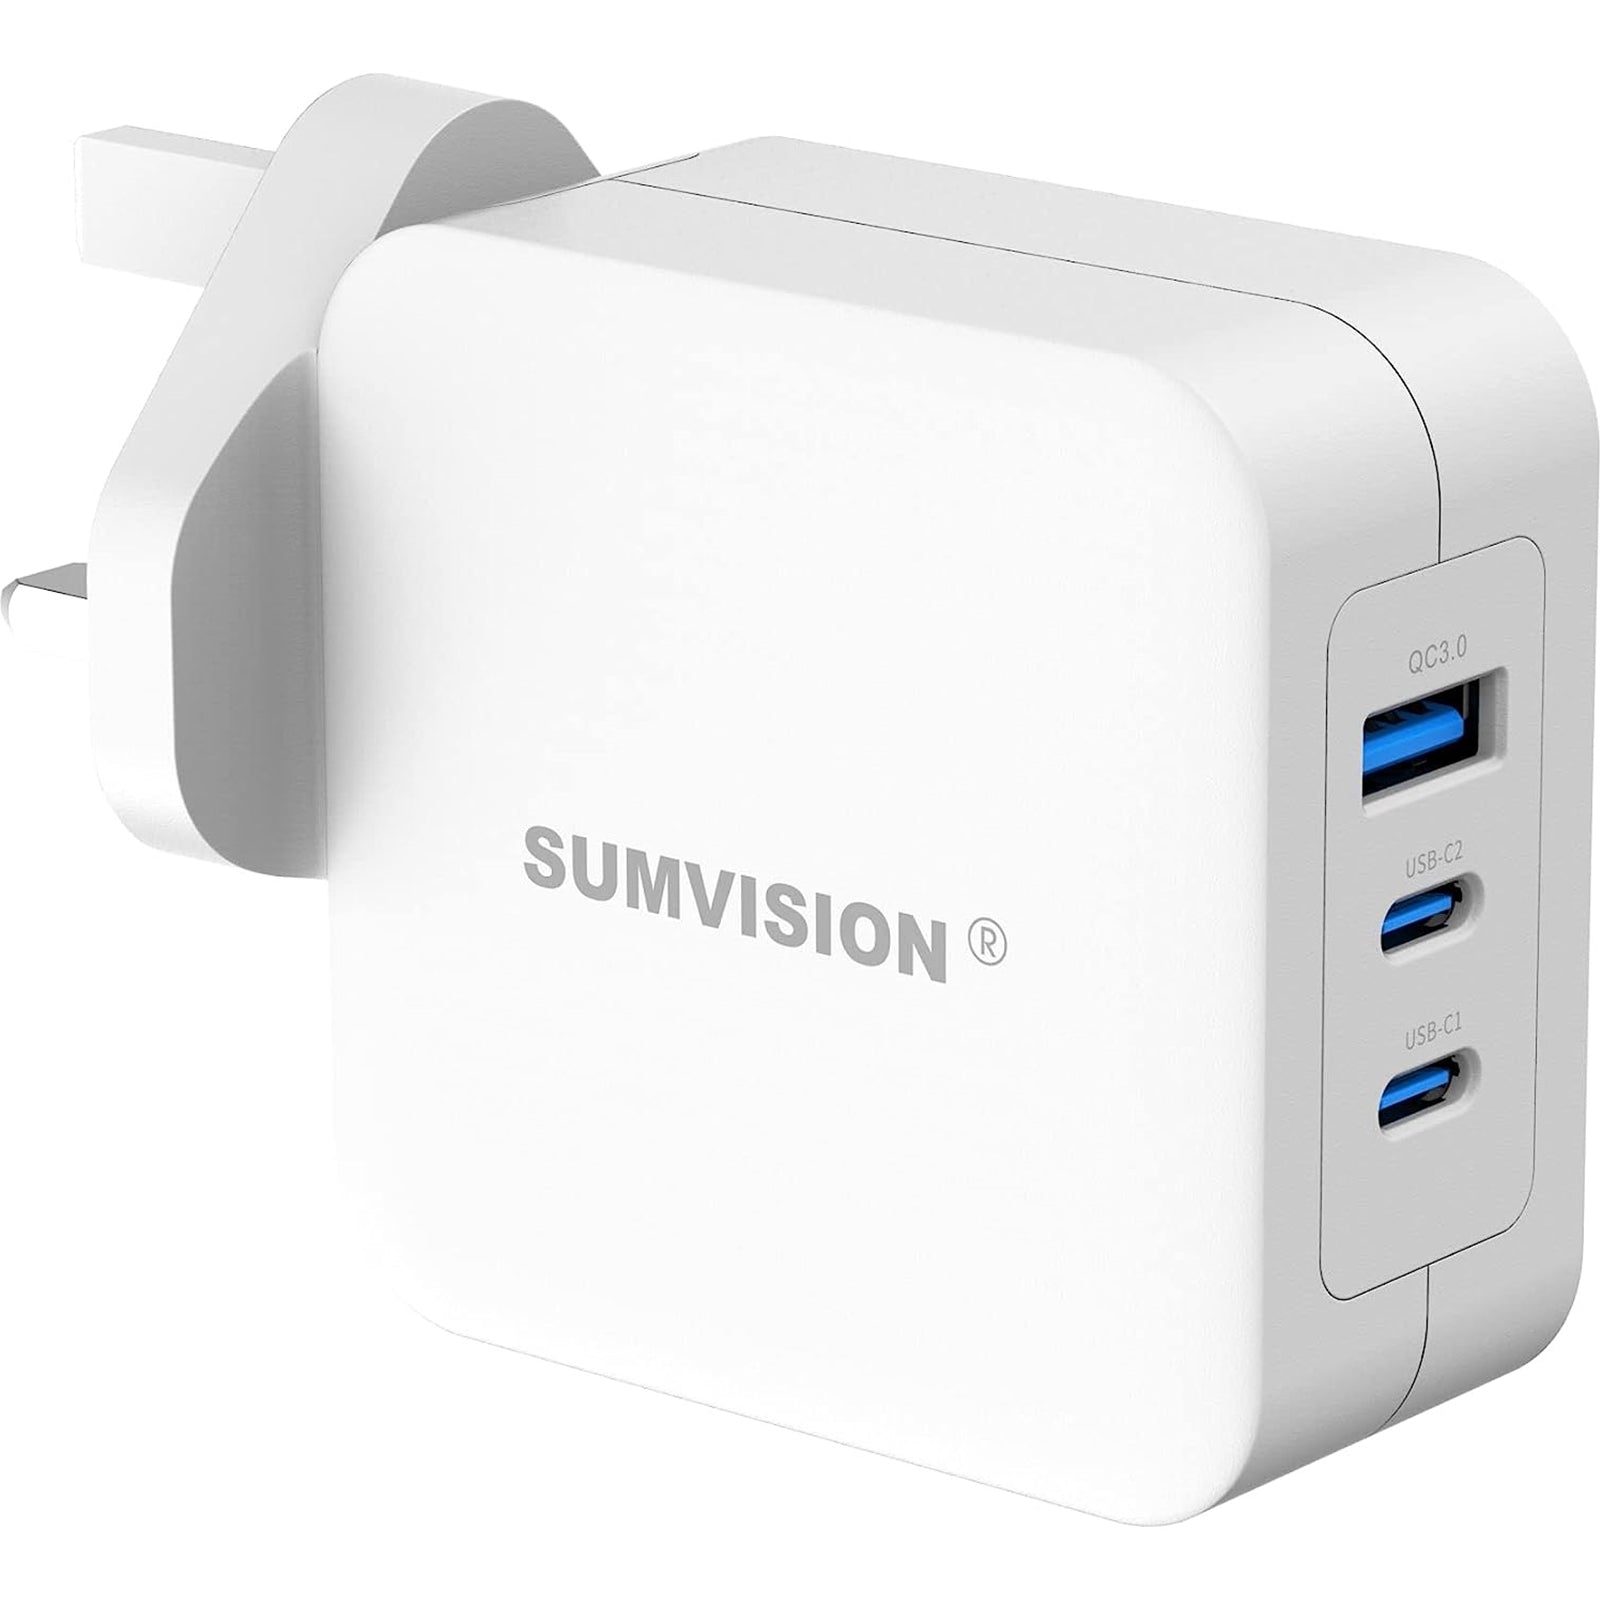 SUMVISION Universal 3 Port USB Laptop Wall Charger, 100W, GaN, Multiport USB Connections with Type-C, USB-A QC 3.0 Fast Charge & USB-A, Includes UK Plug, Suitable for USB-C Laptop Charging, UK Design and Free UK Tech Support